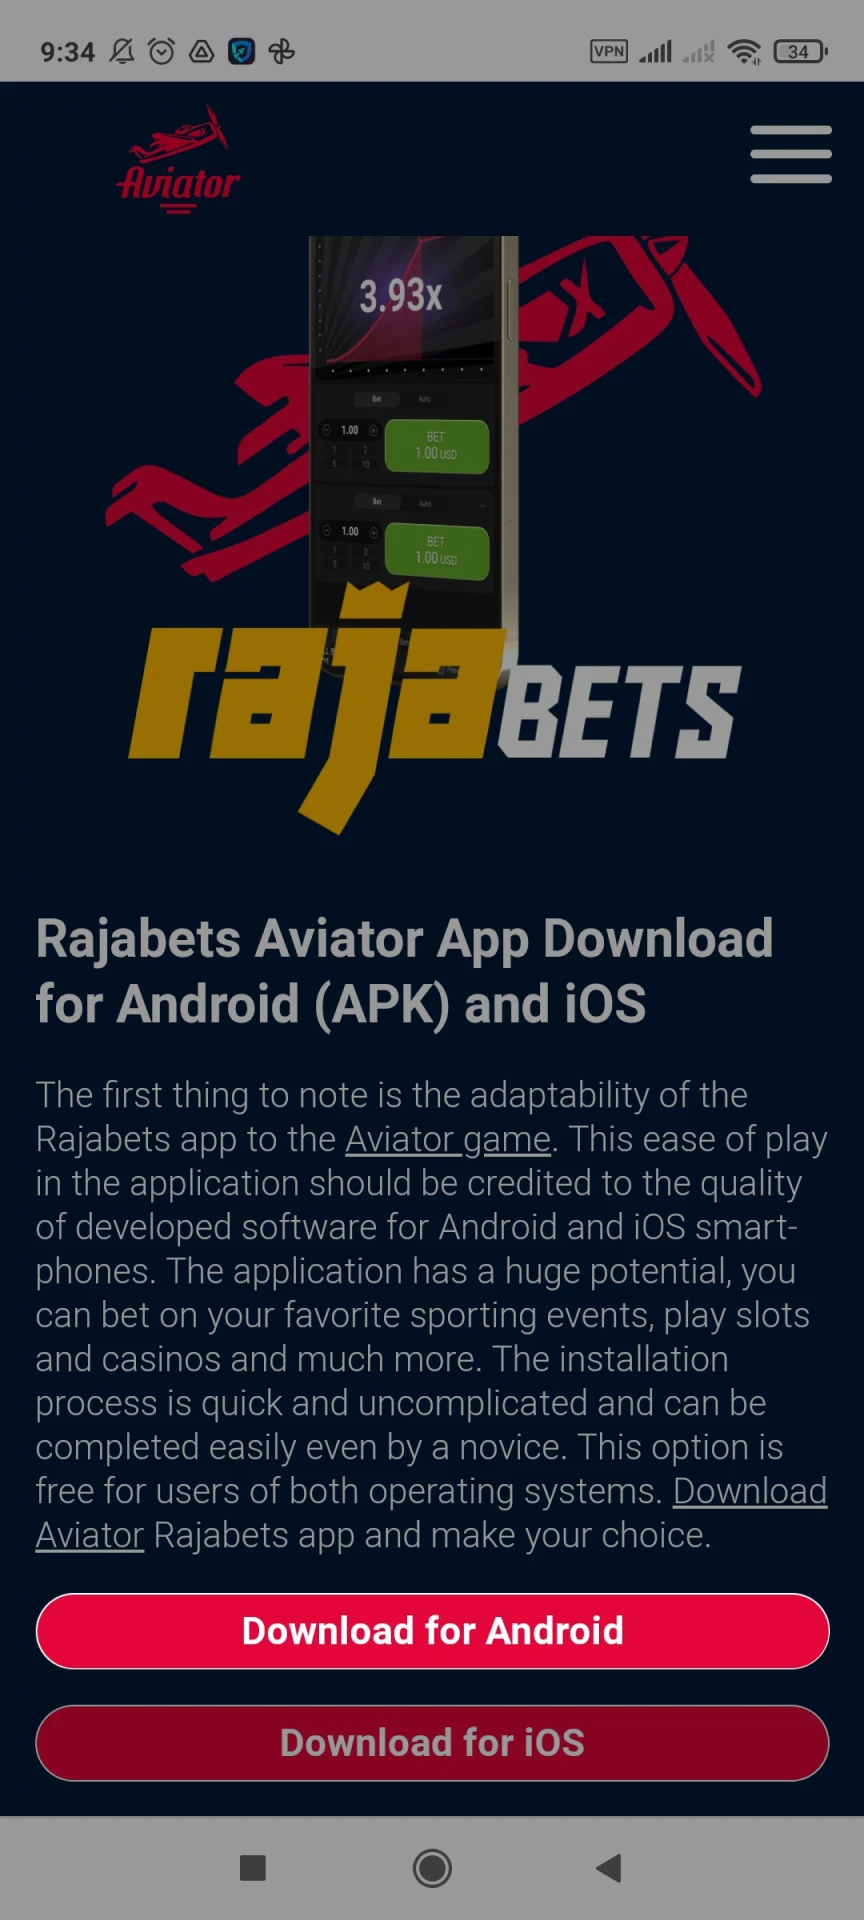 Go to the Rajabets download page for Android.